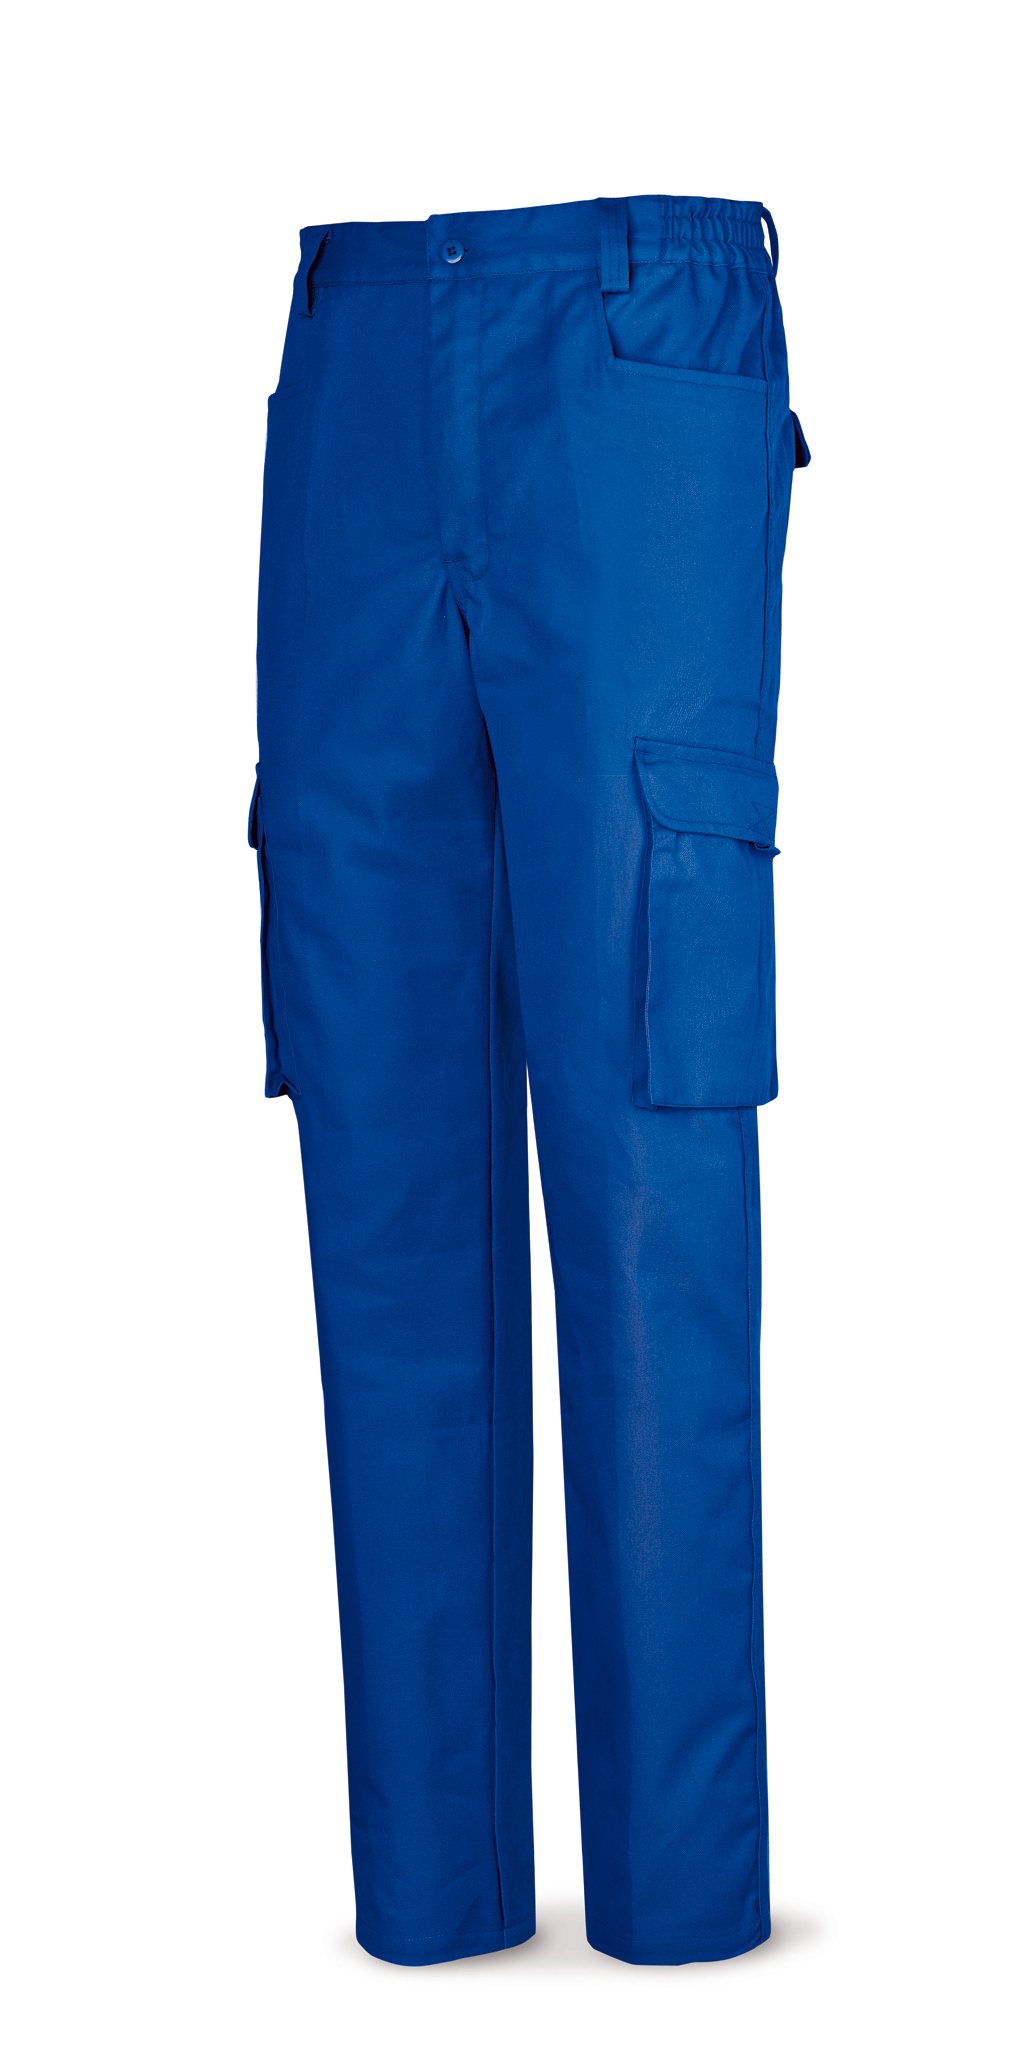 488-B Top Workwear Top Series Overall 100% Cotton. Royal blue.